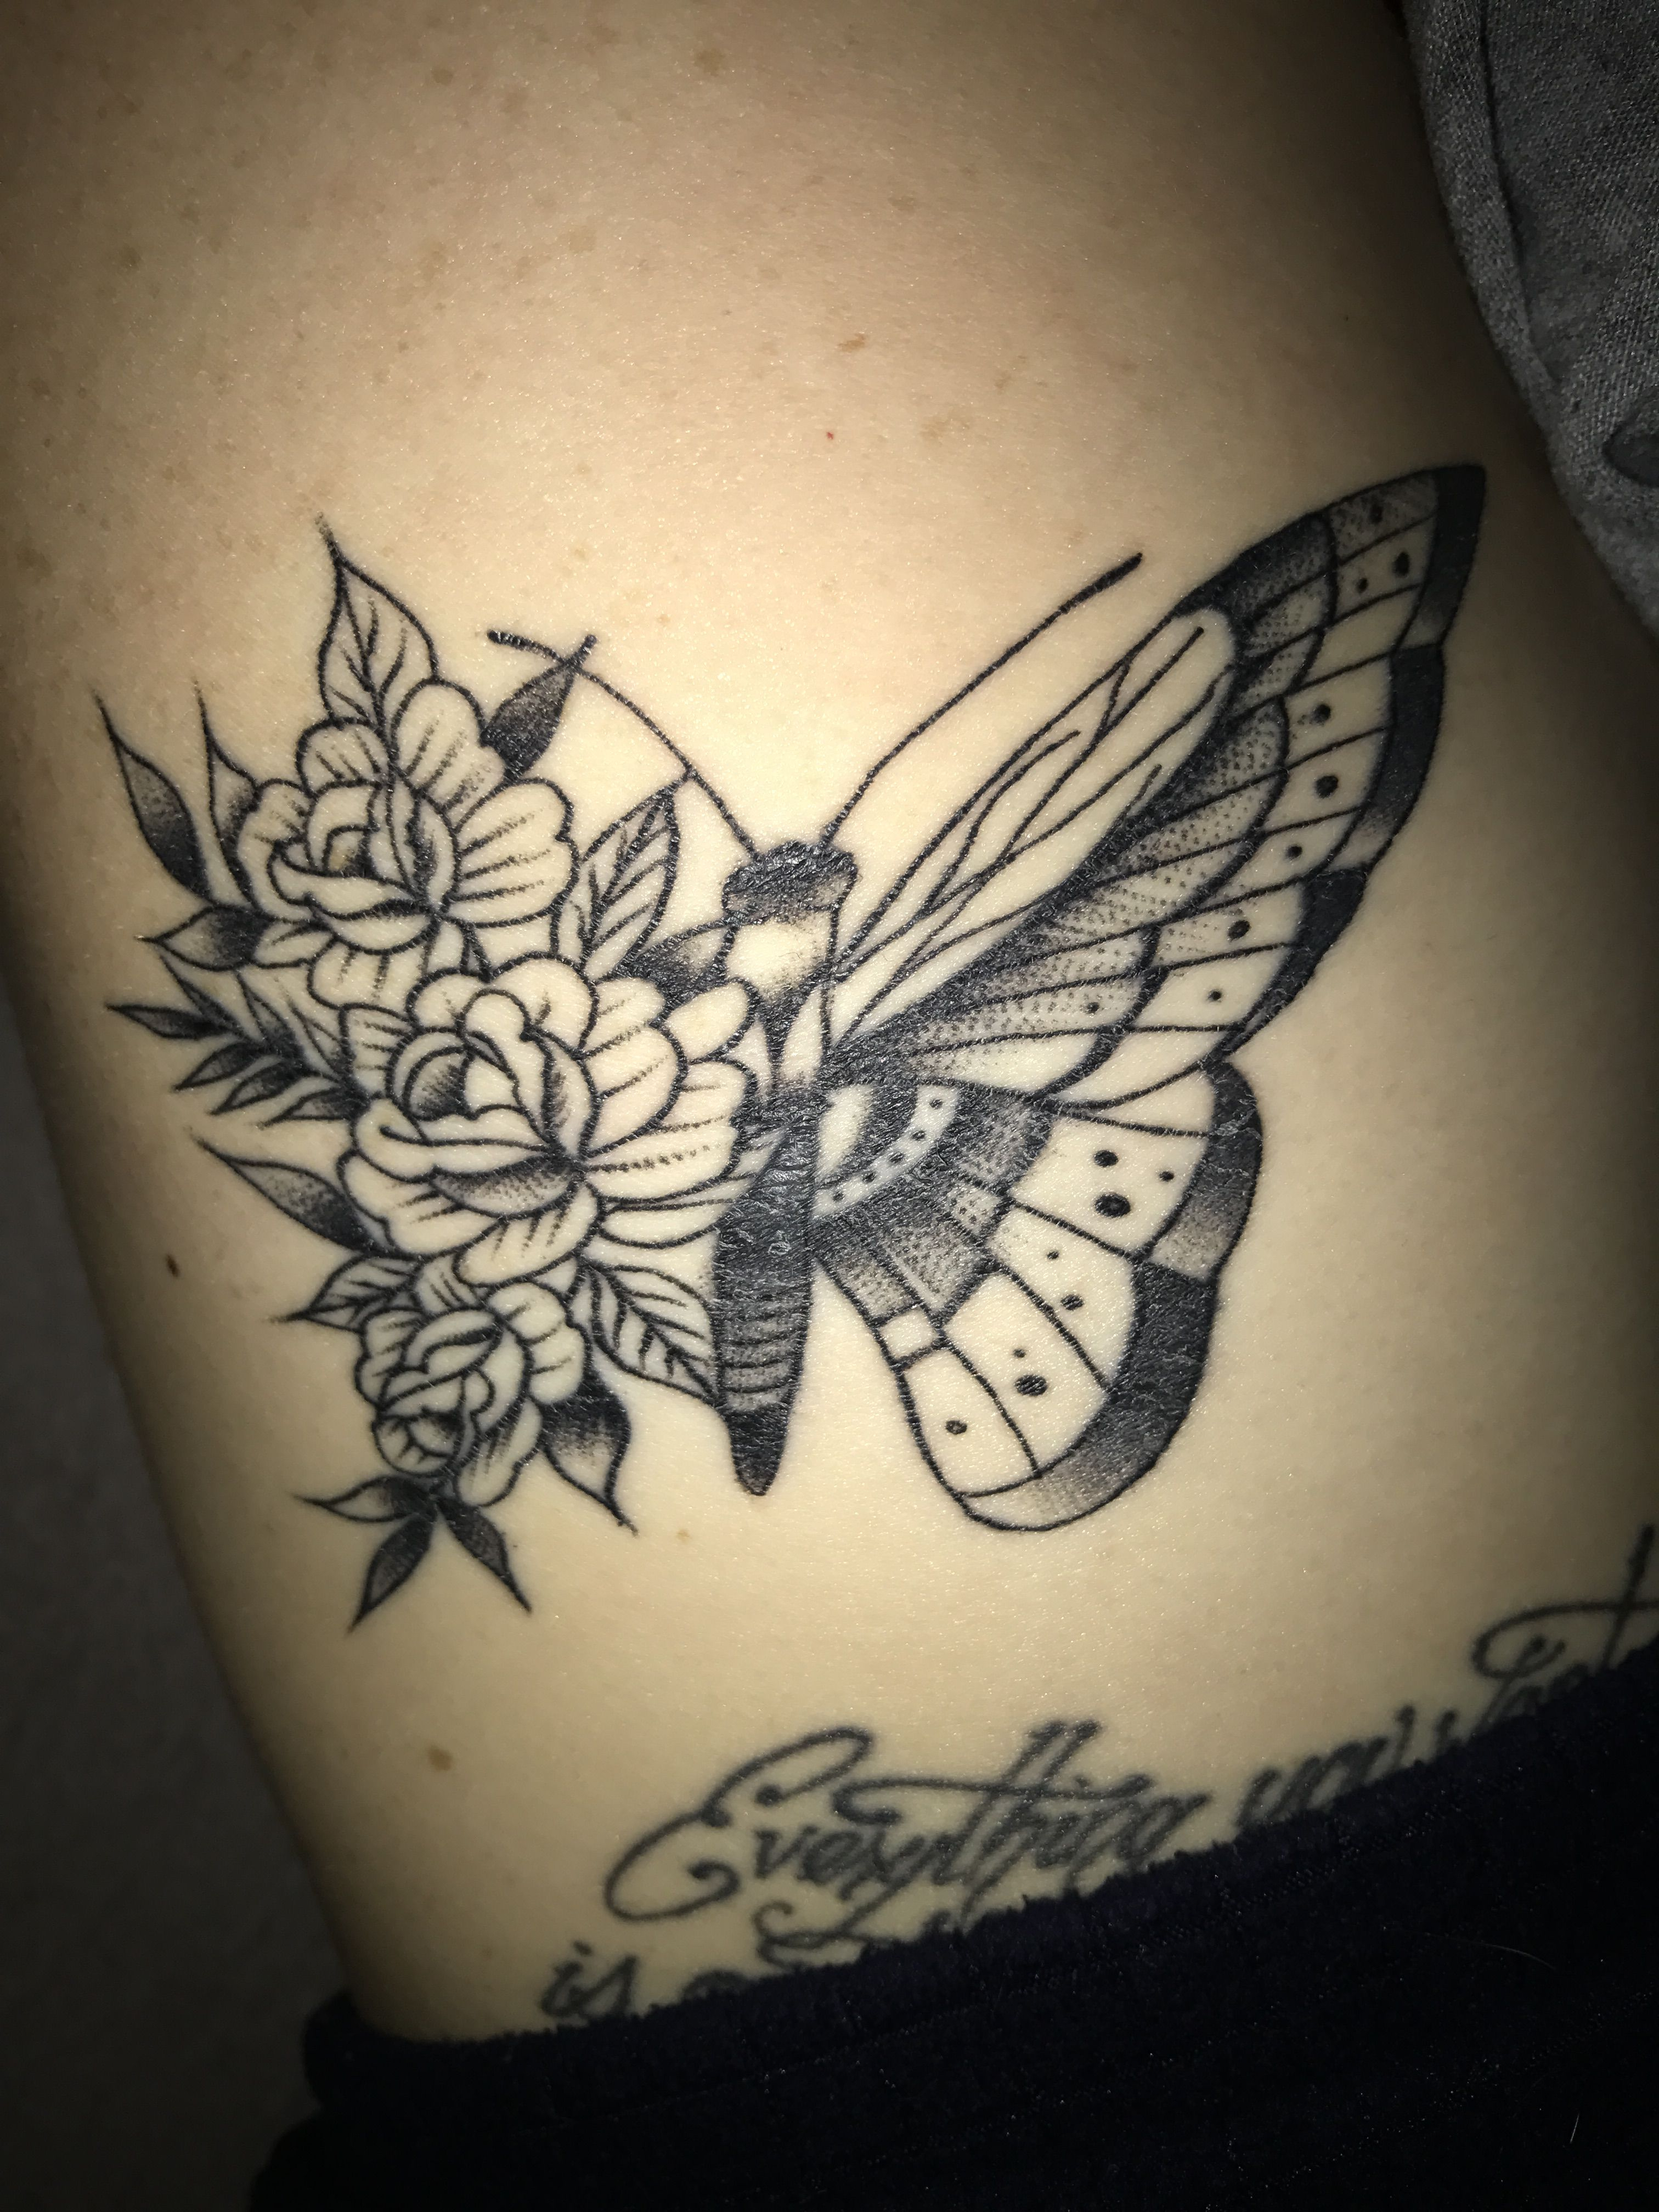 Butterfly Tattoo With Flower Wing Tattoos Tattoos Flowers Drawings with dimensions 3024 X 4032